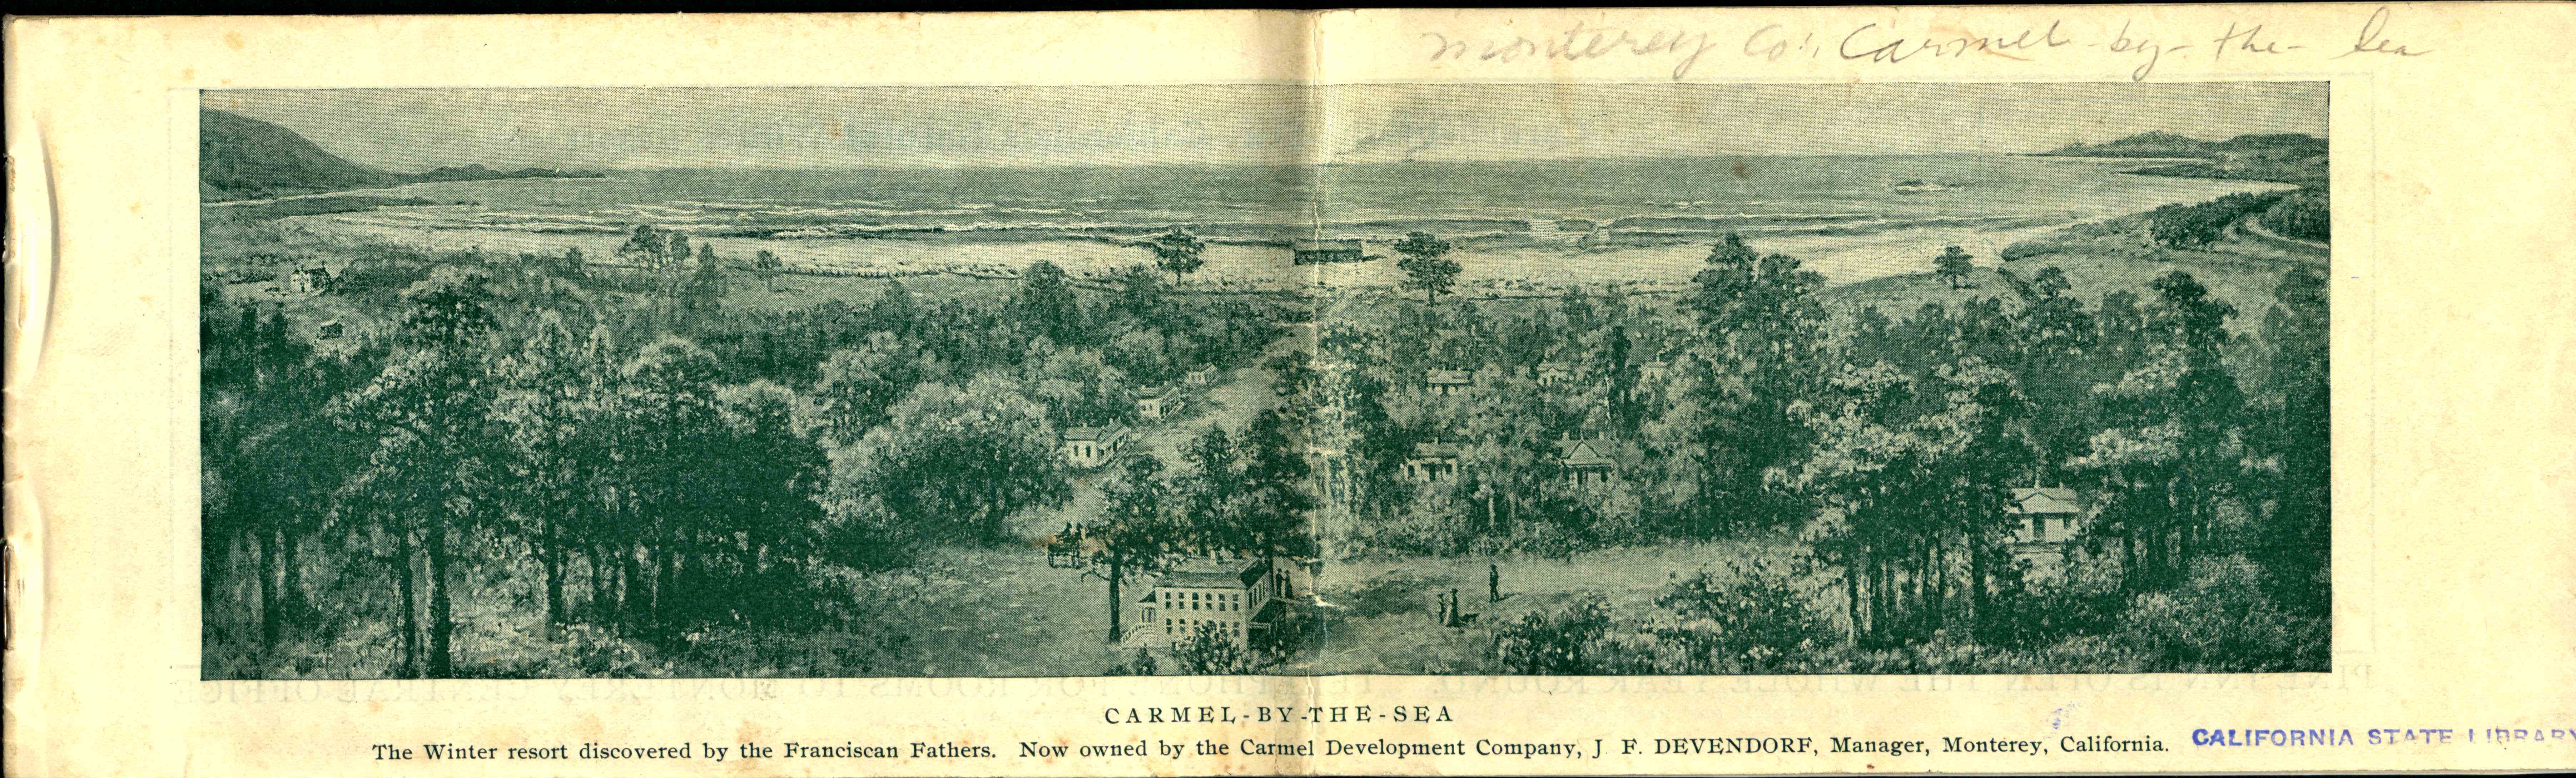 Front page shows aerial view of Carmel-By-The-Sea above the title information